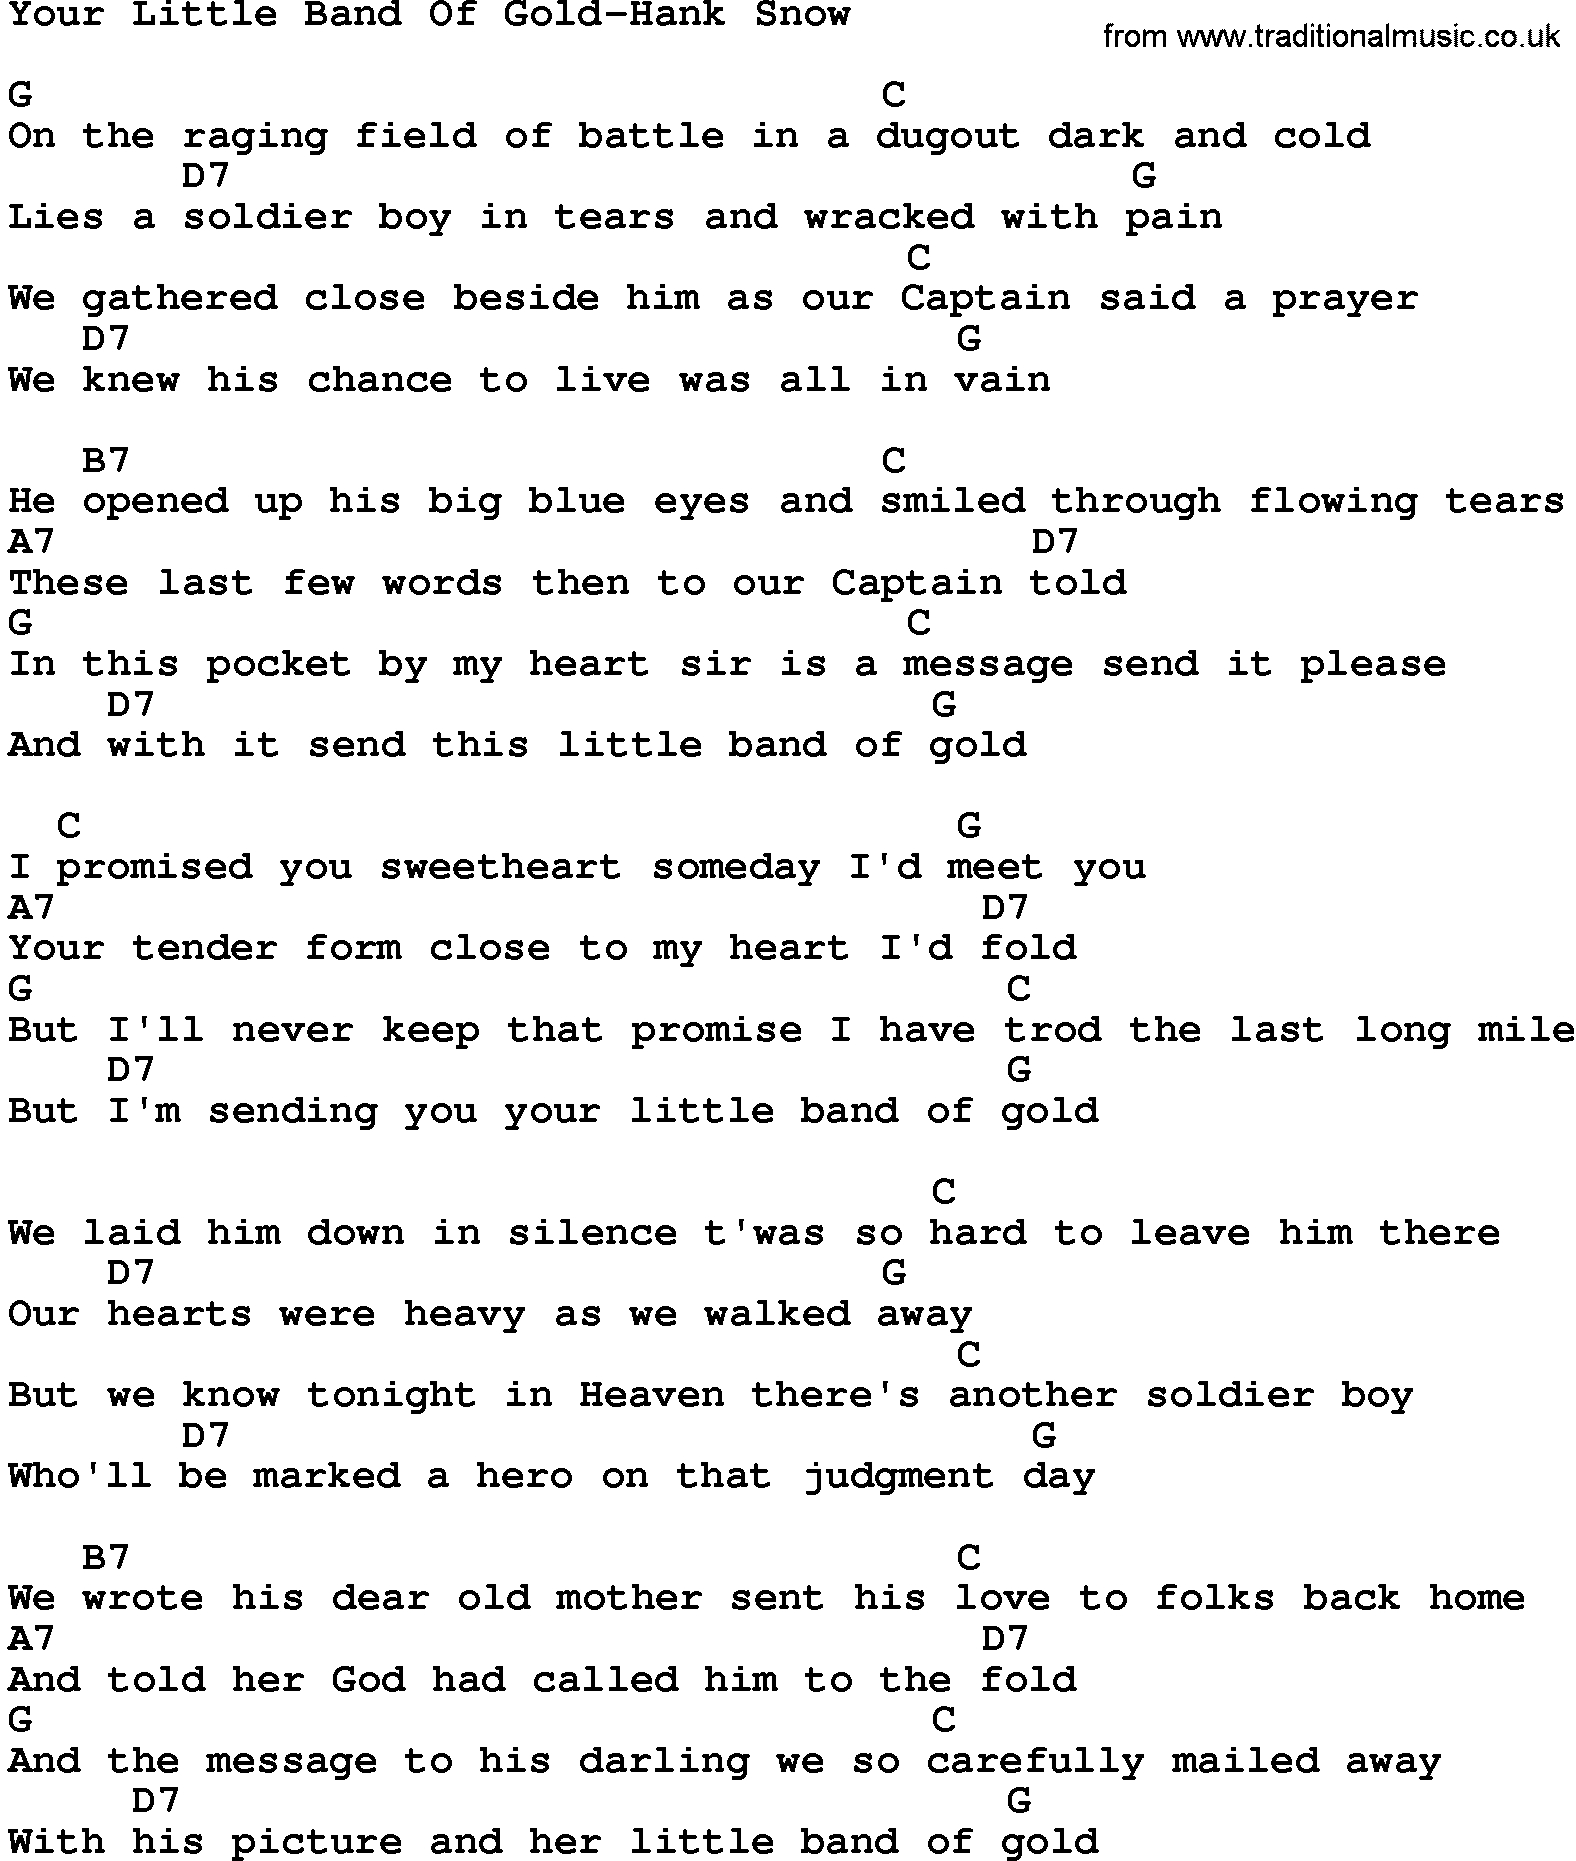 Heart Of Gold Chords Country Musicyour Little Band Of Gold Hank Snow Lyrics And Chords